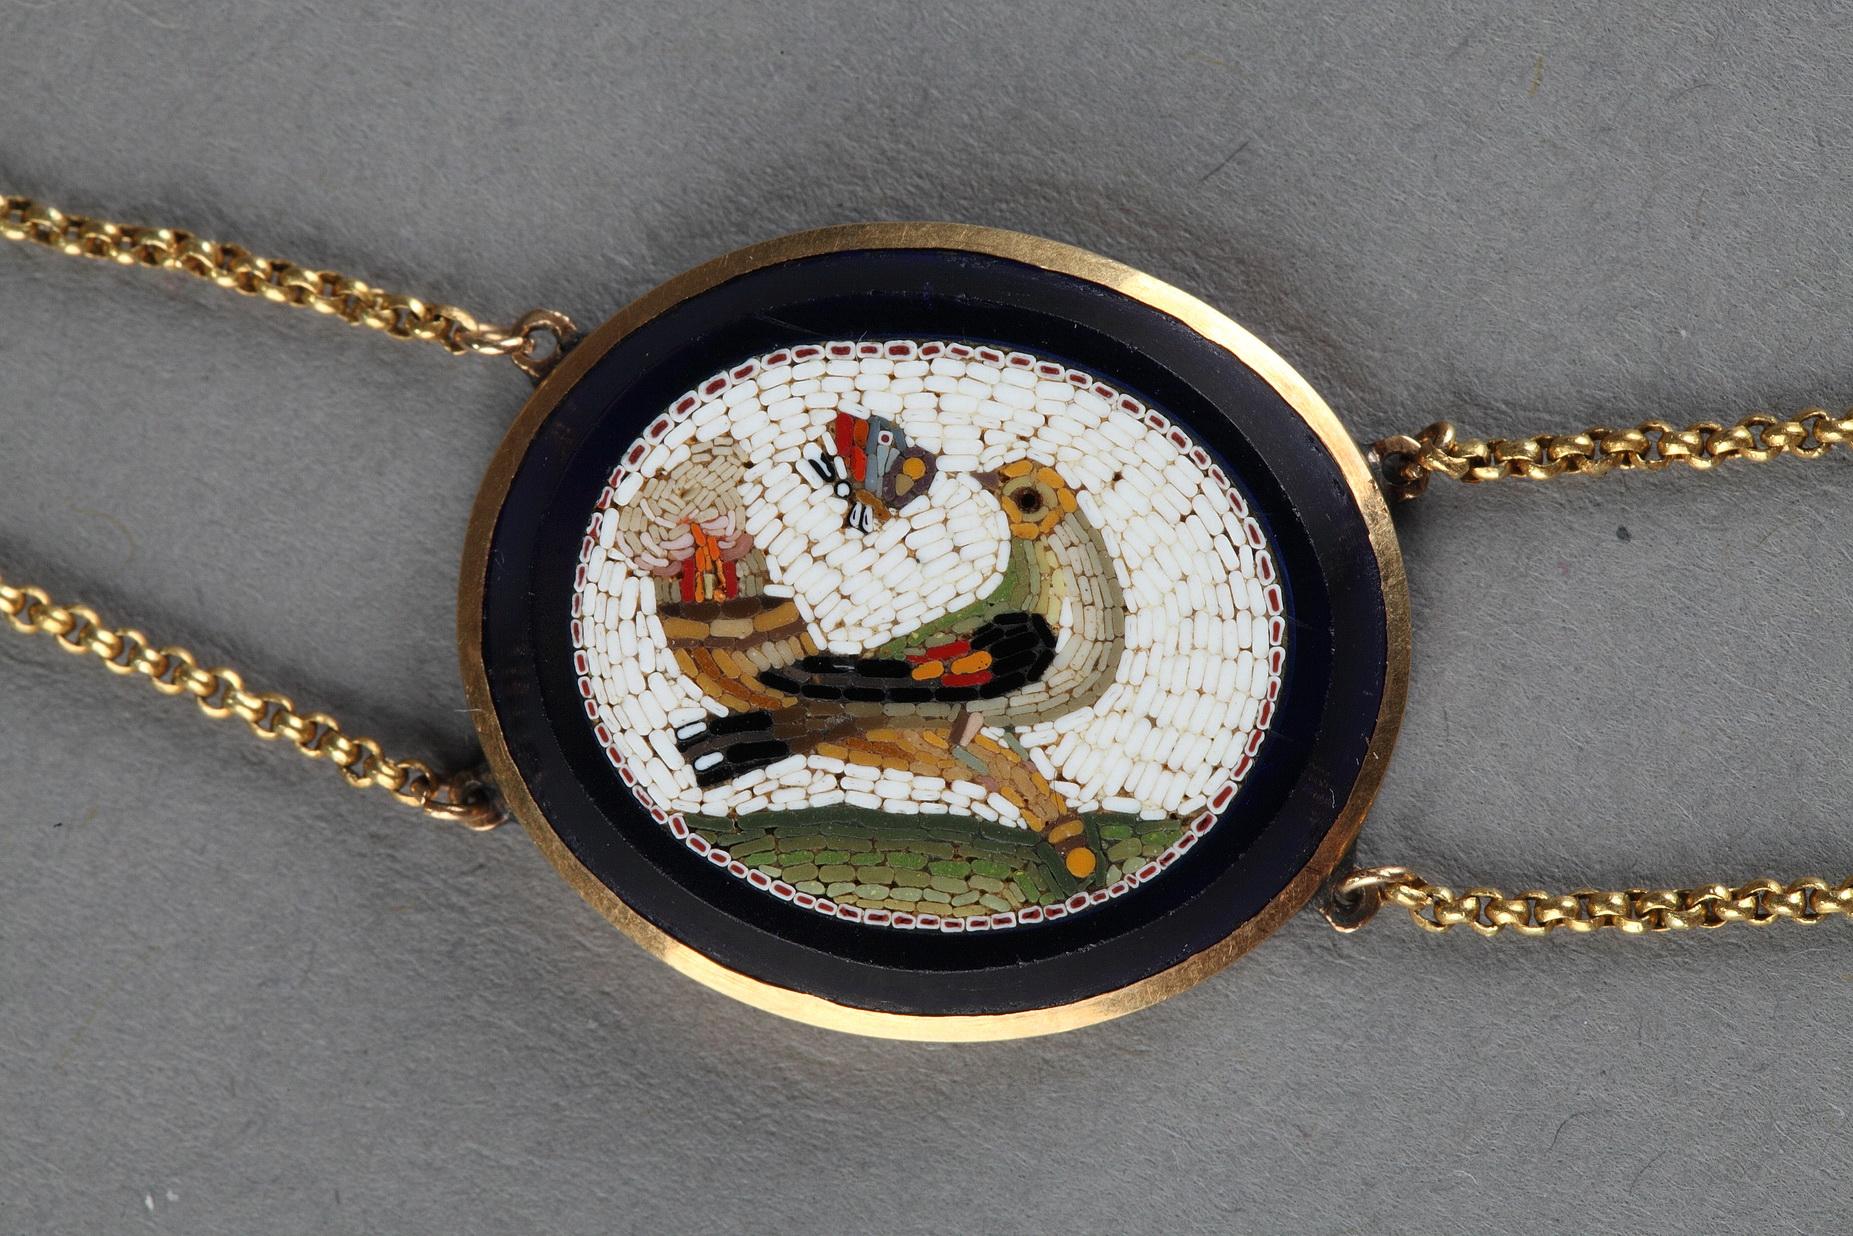 A gold necklace and micromosaic. The necklace is composed of seven micromosaic medallions set in dark blue glass. Two gold strands support the micromosaics between them. The subjects of the micromosaic plates are uncommon, as they do not represent